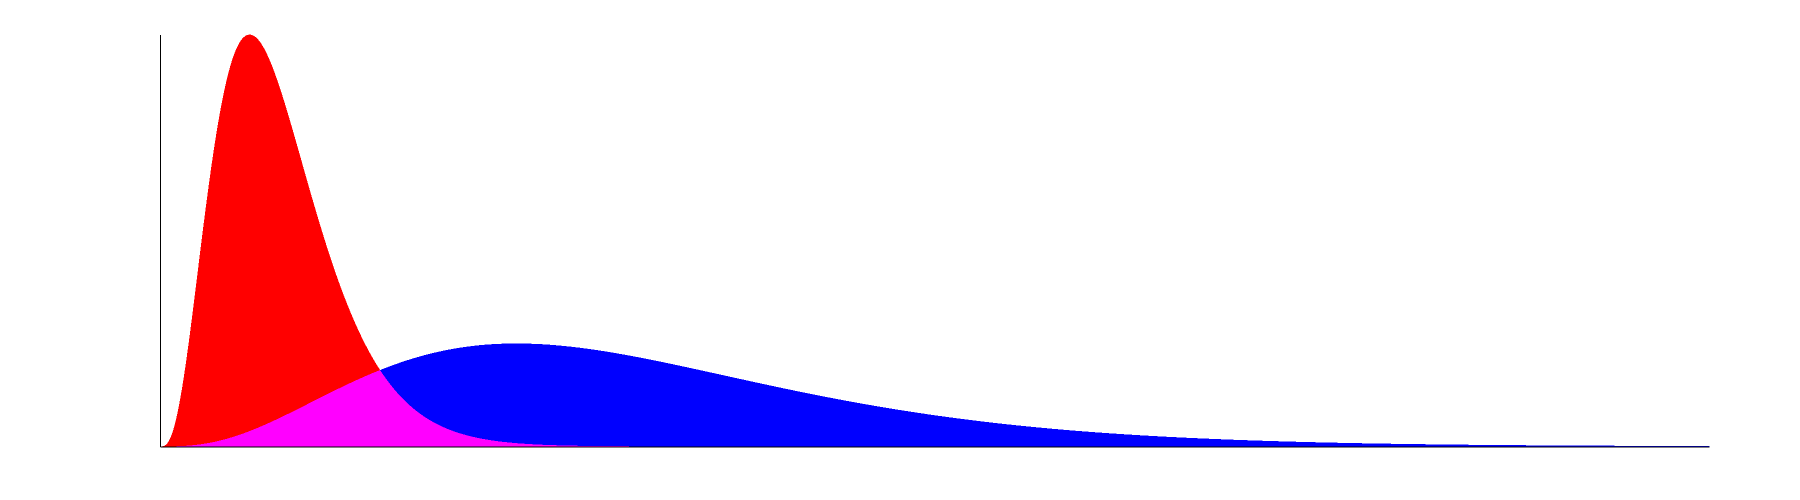 Gamma distributions with (k=4, theta=1) in red, (k=4, theta=4) in blue